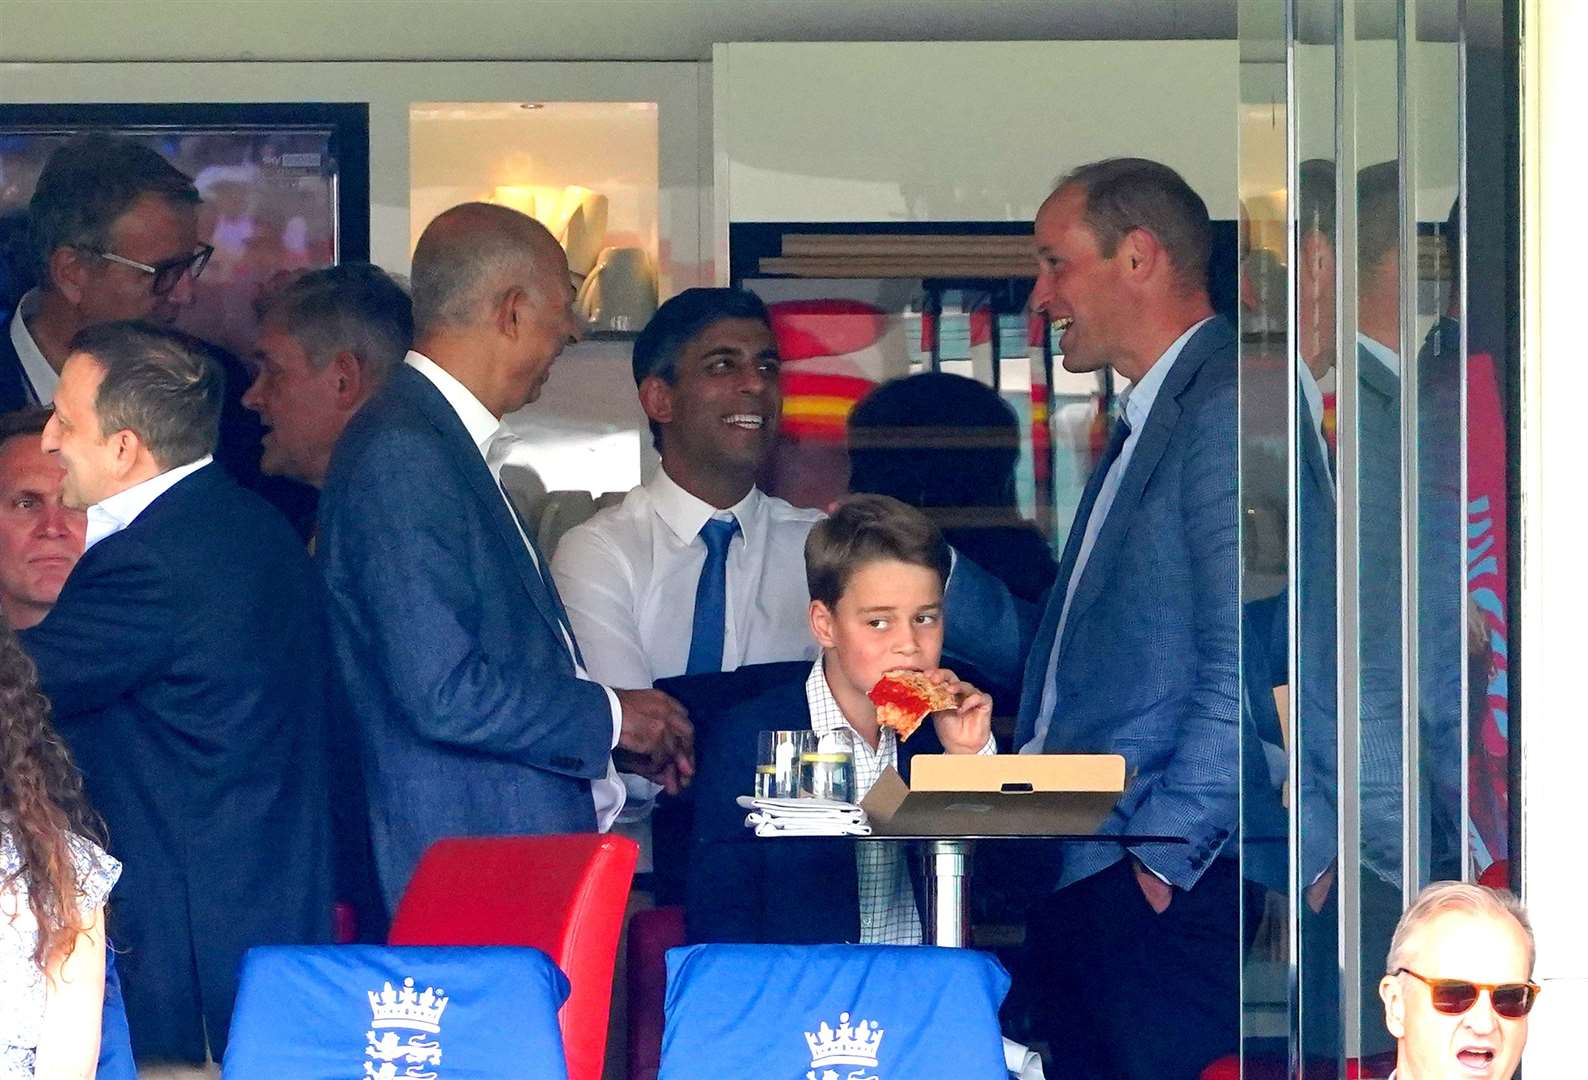 The Prince of Wales chatted to Prime Minister Rishi Sunak while Prince George enjoyed a slice of pizza at the cricket (Mike Egerton/PA)